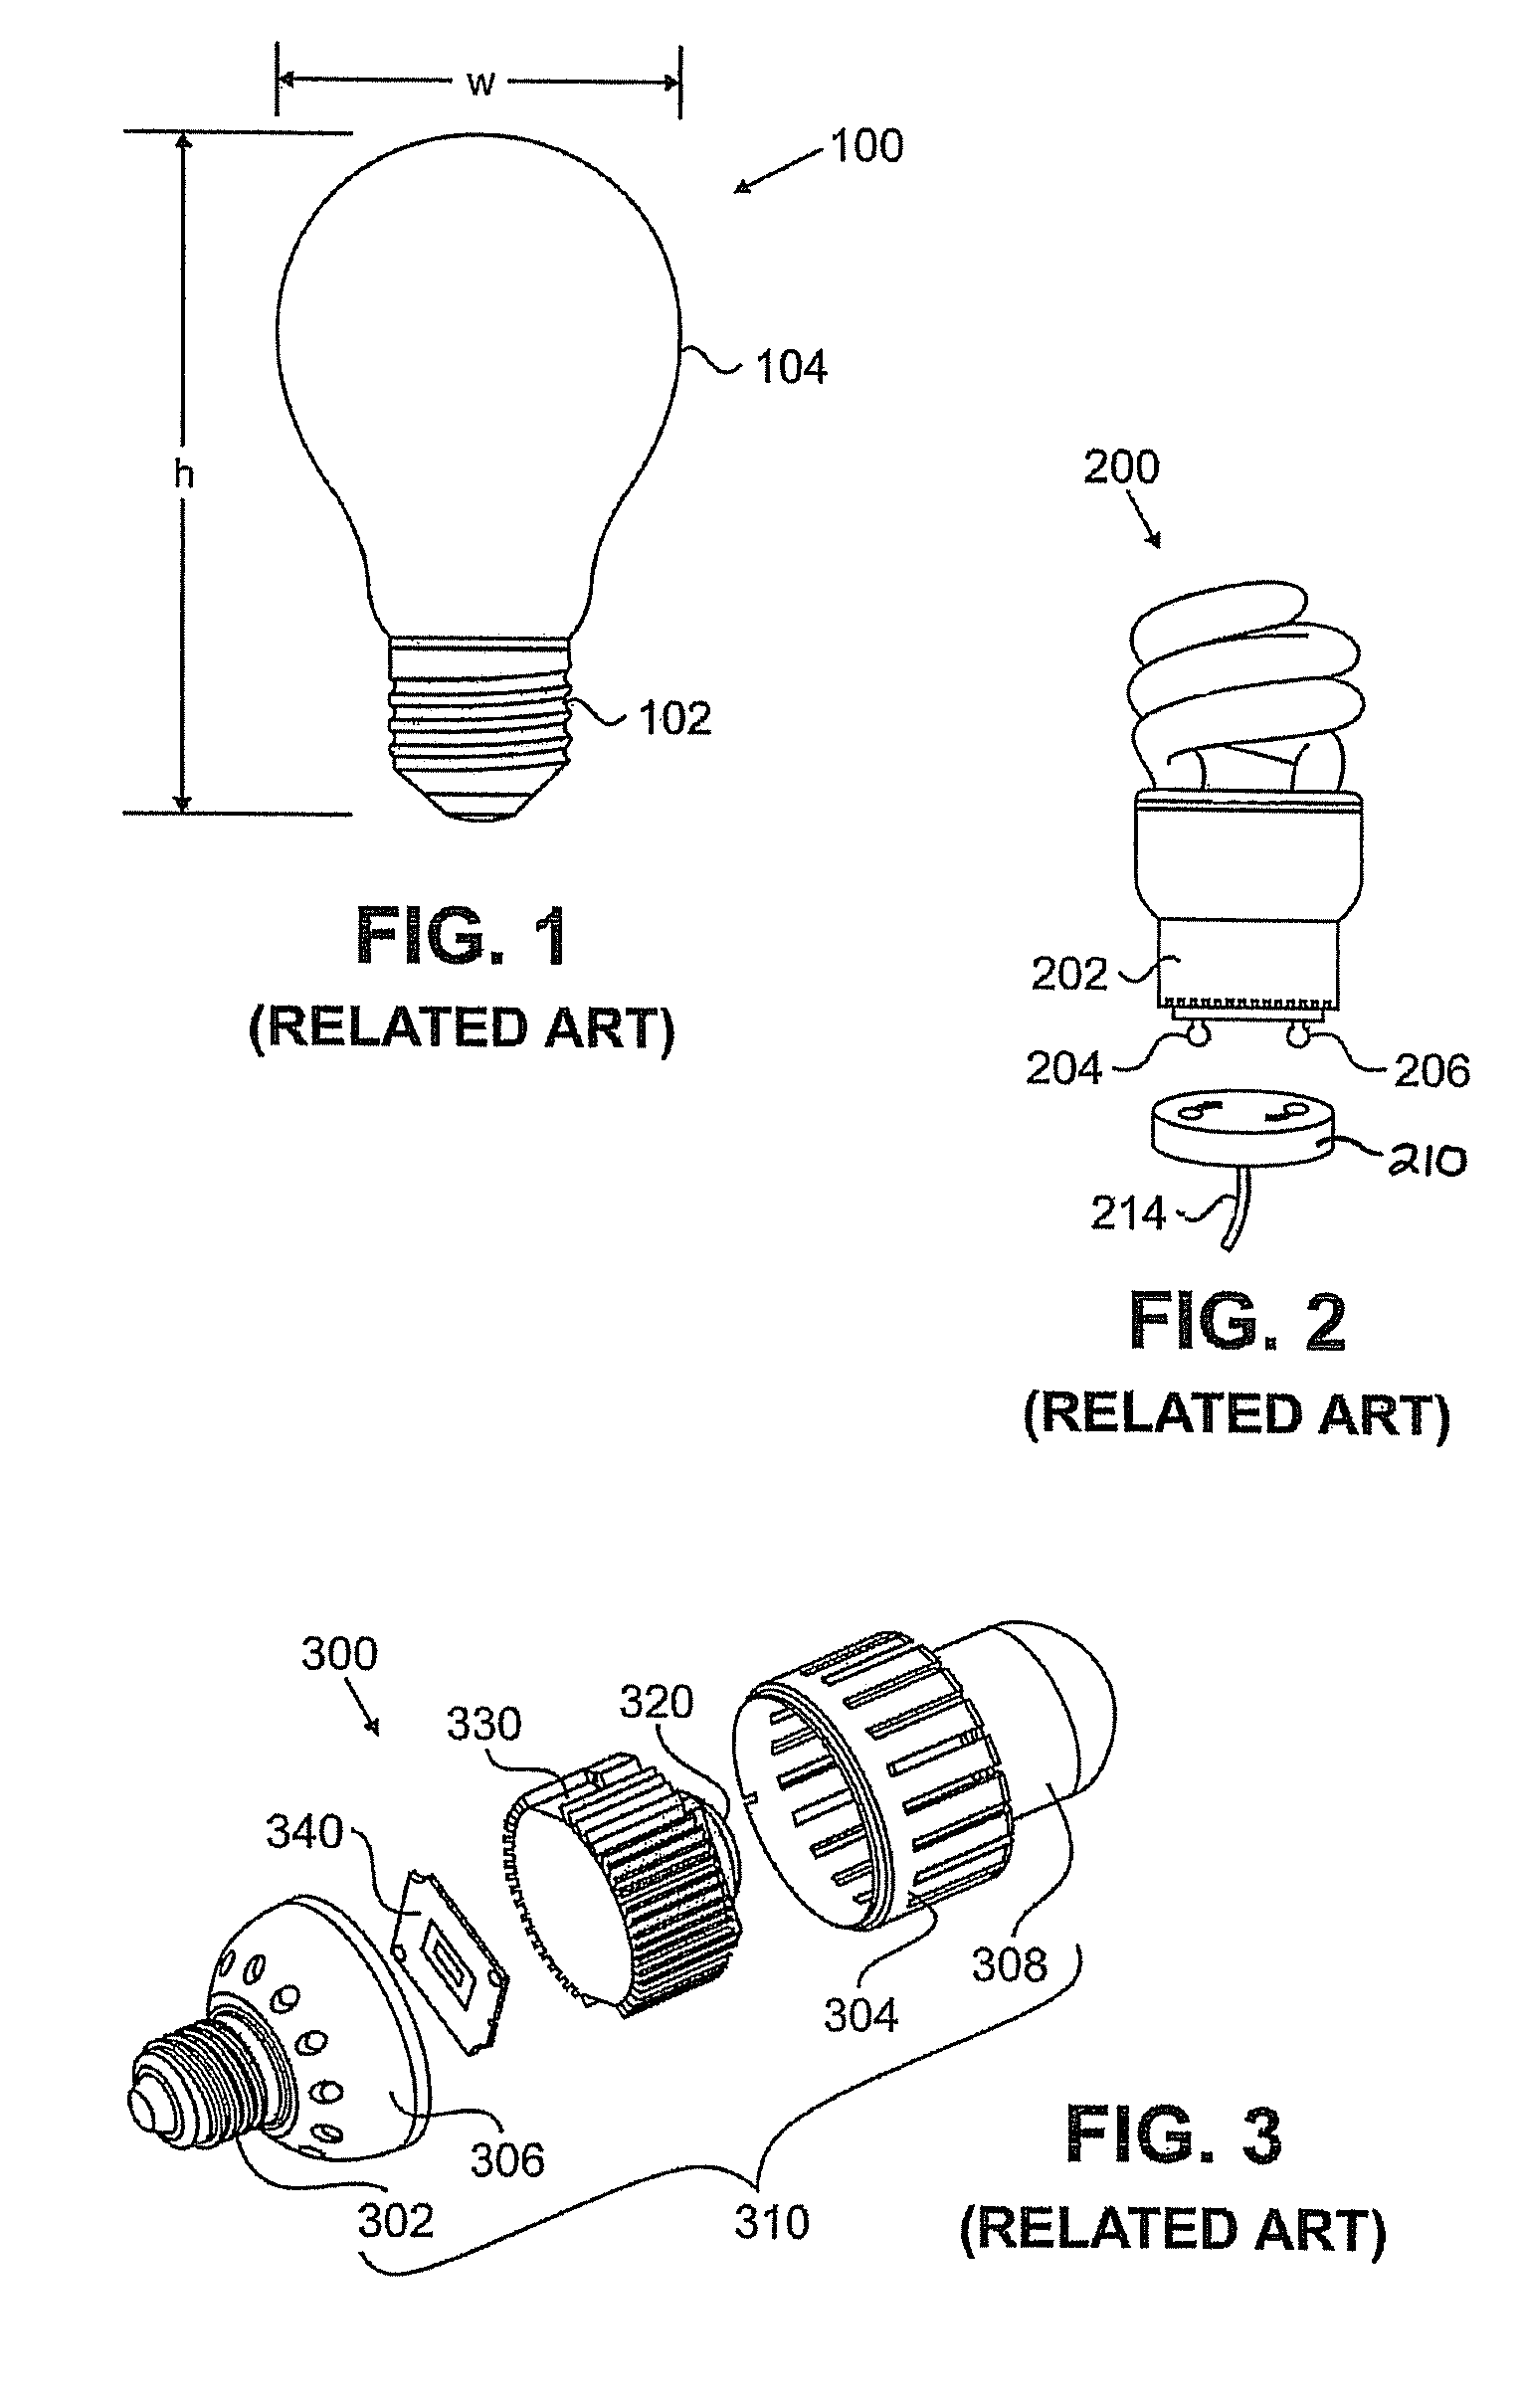 Heat sinks and lamp incorporating same